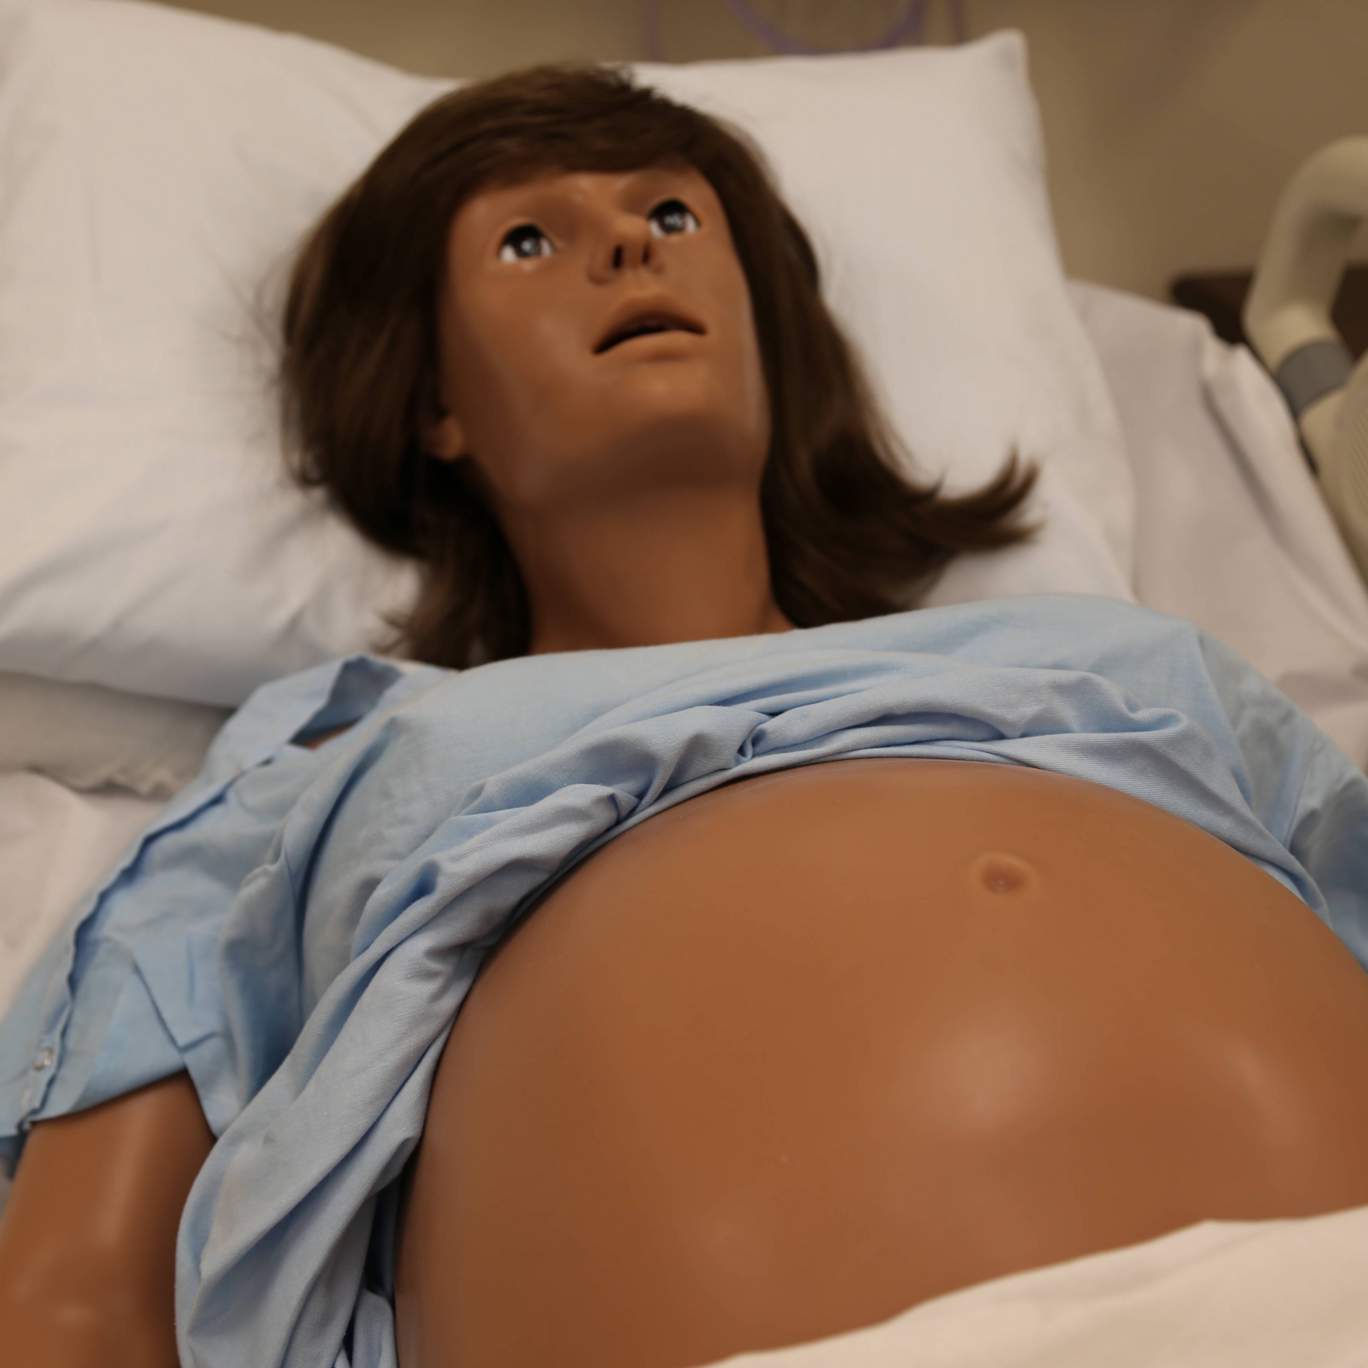 Manikin with belly exposed